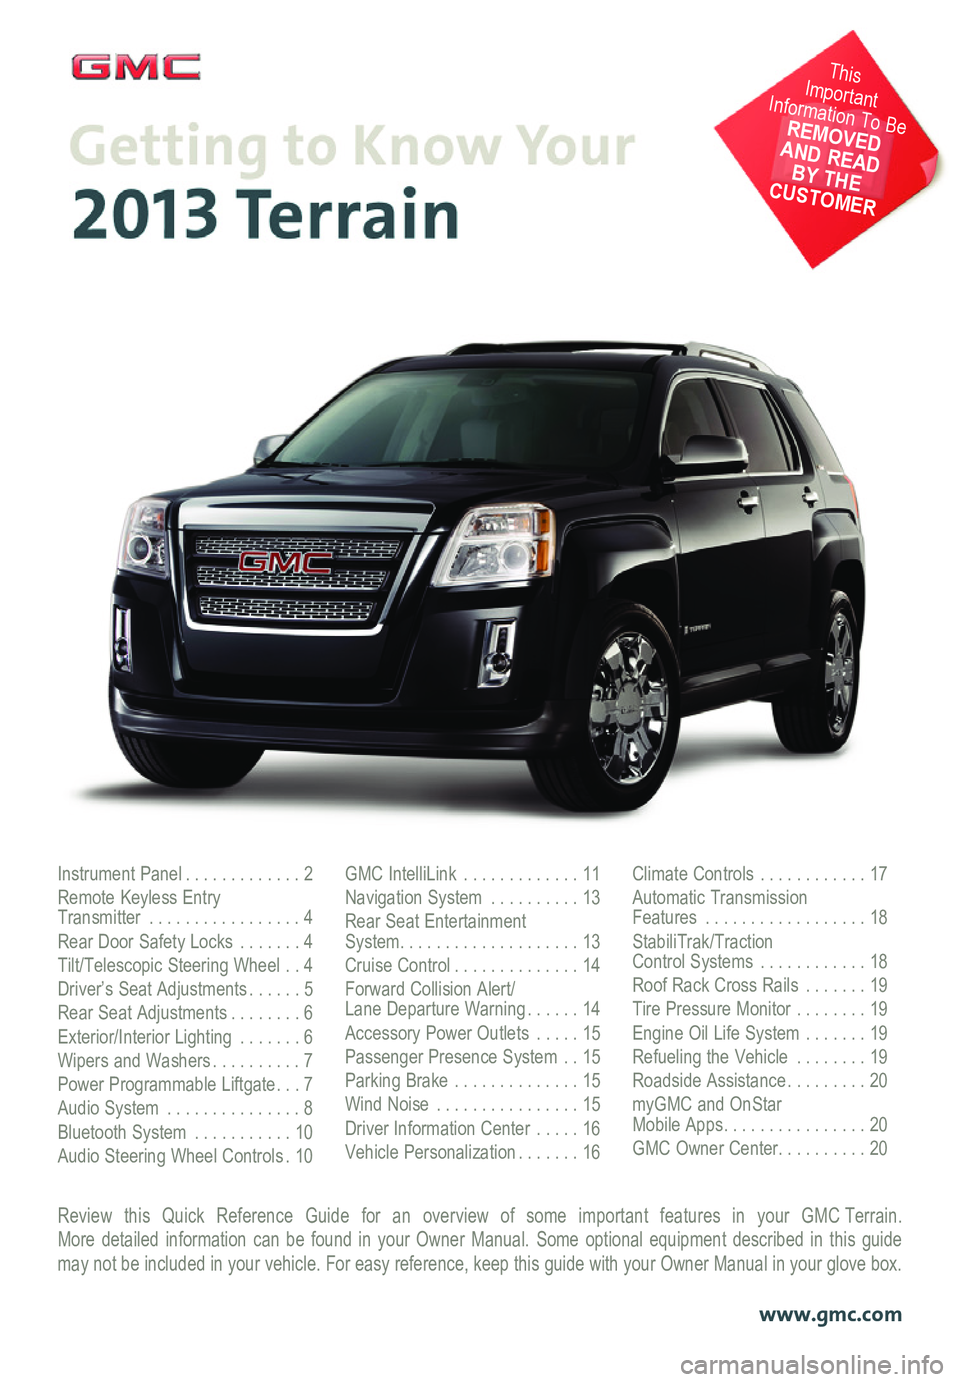 GMC TERRAIN 2013  Get To Know Guide 